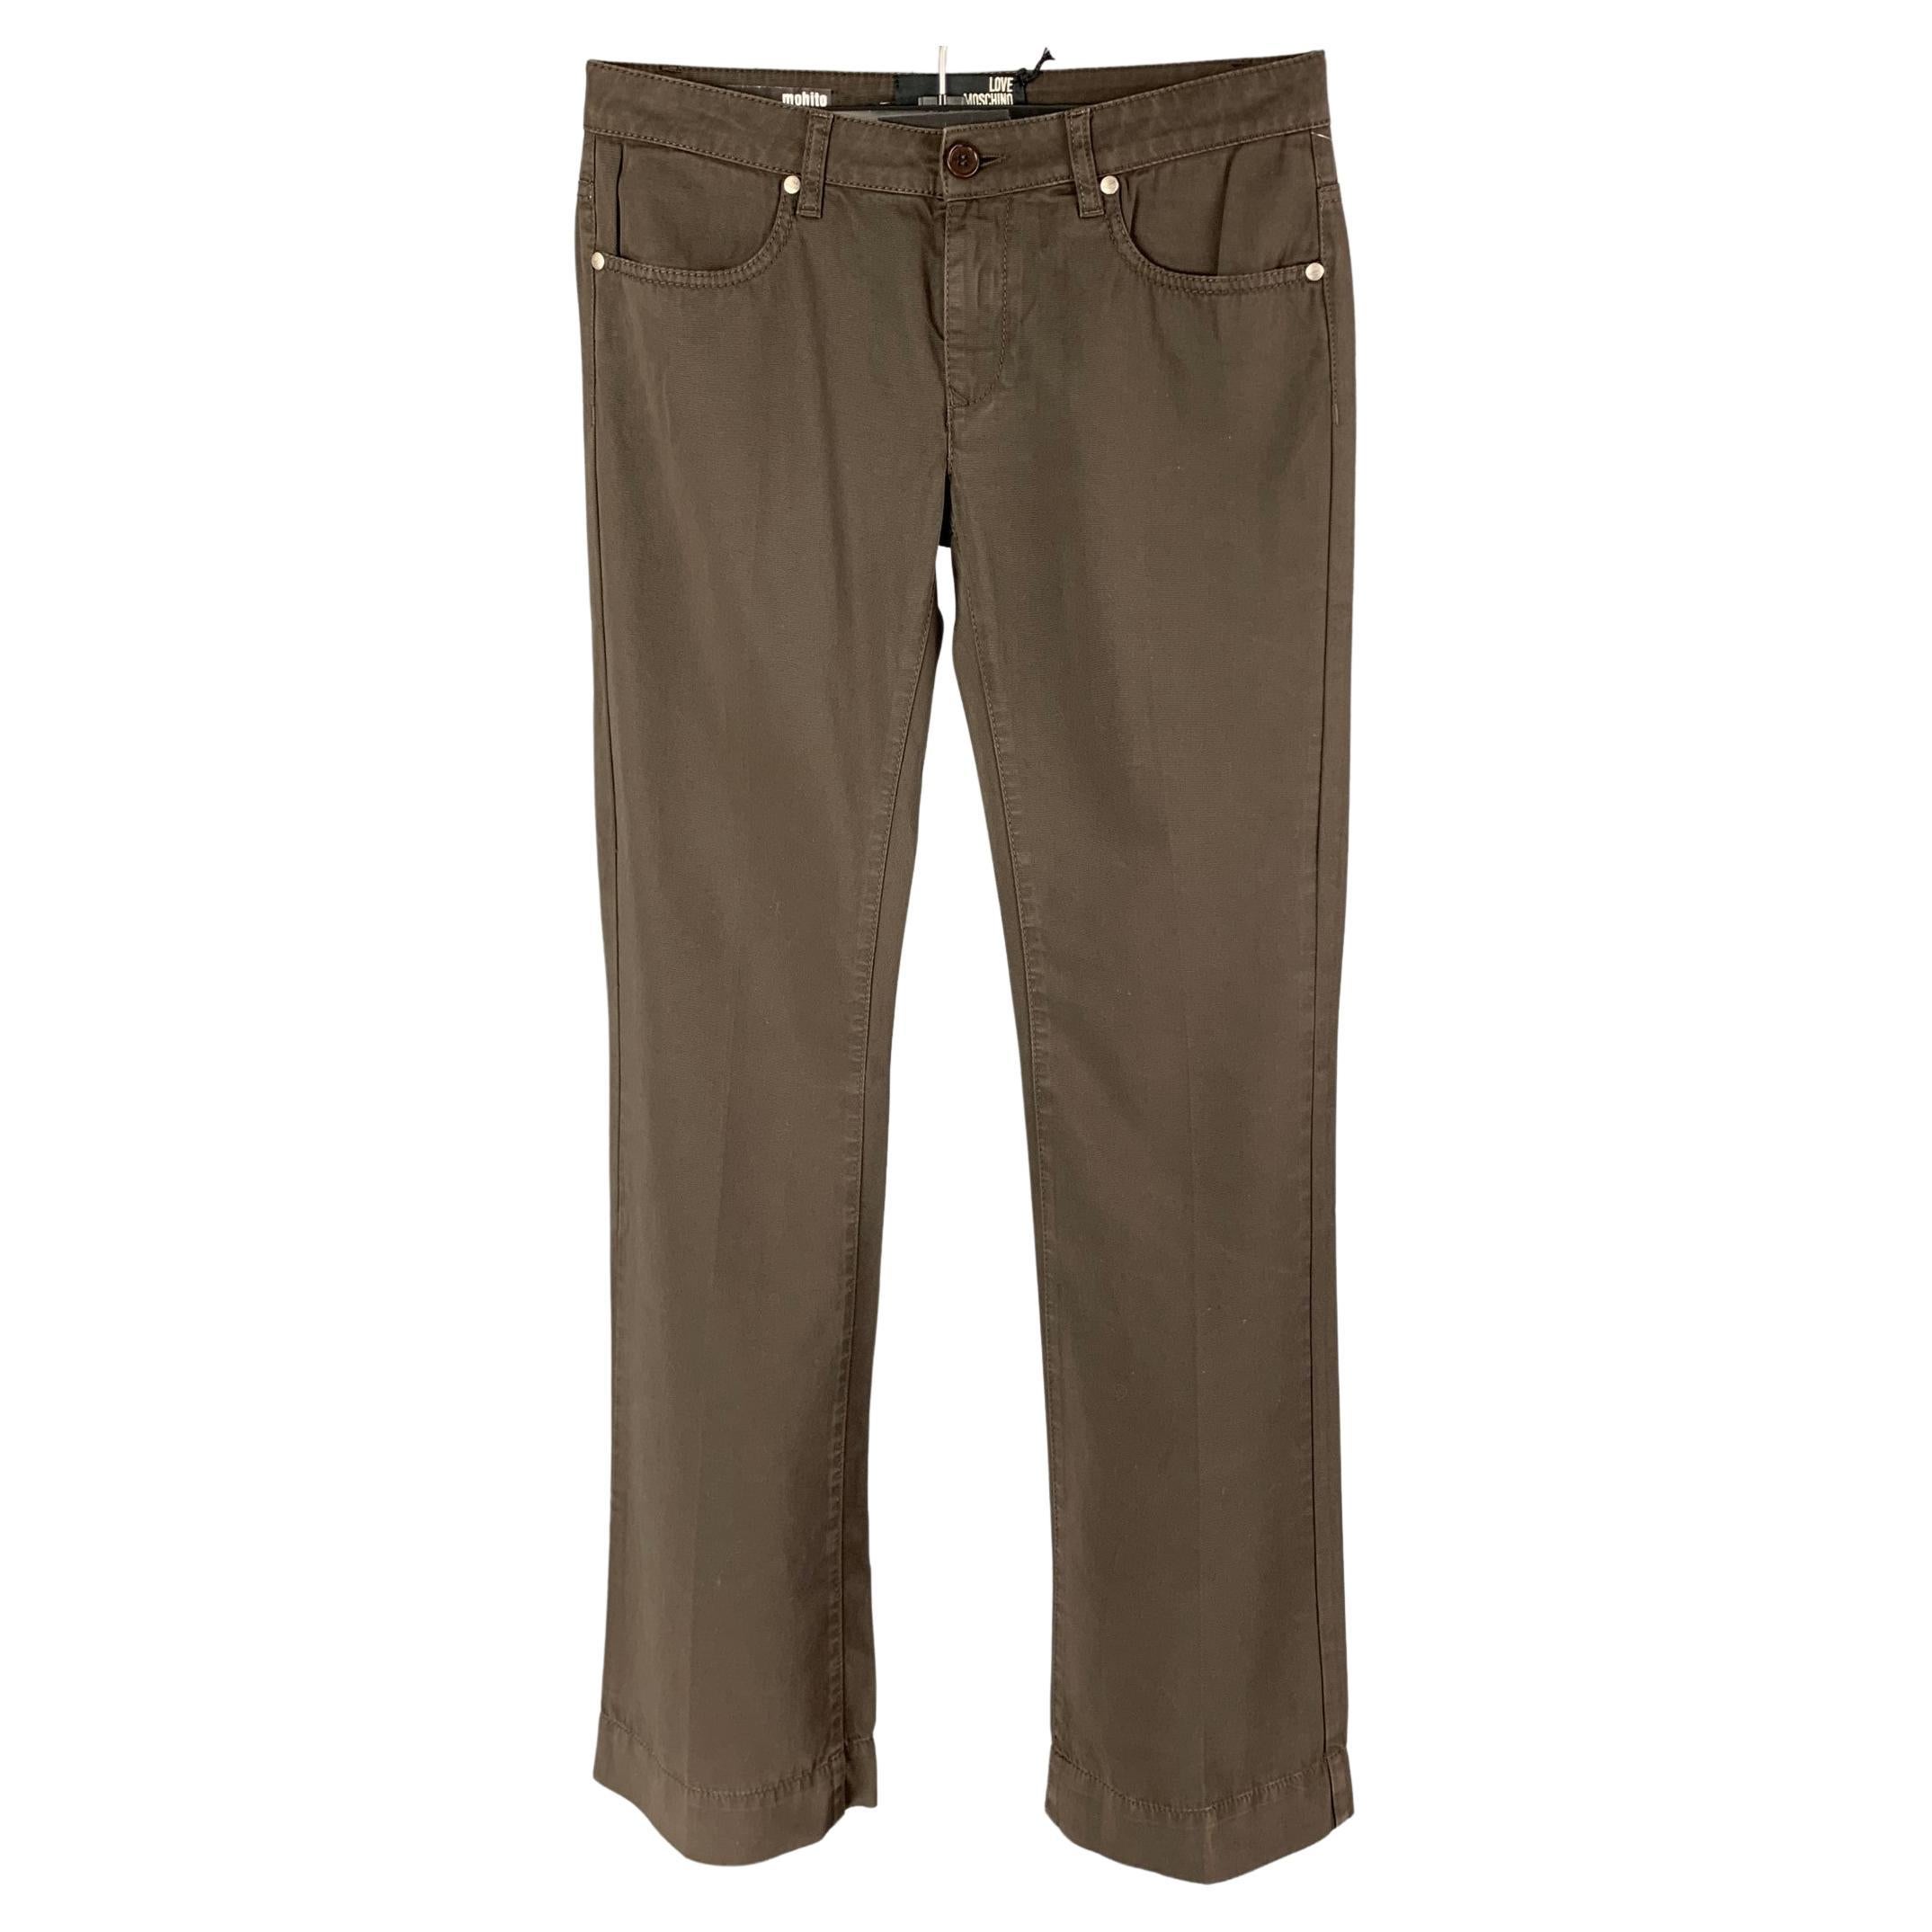 LOVE MOSCHINO Size 26 Brown Cotton Flat Front Casual Pants